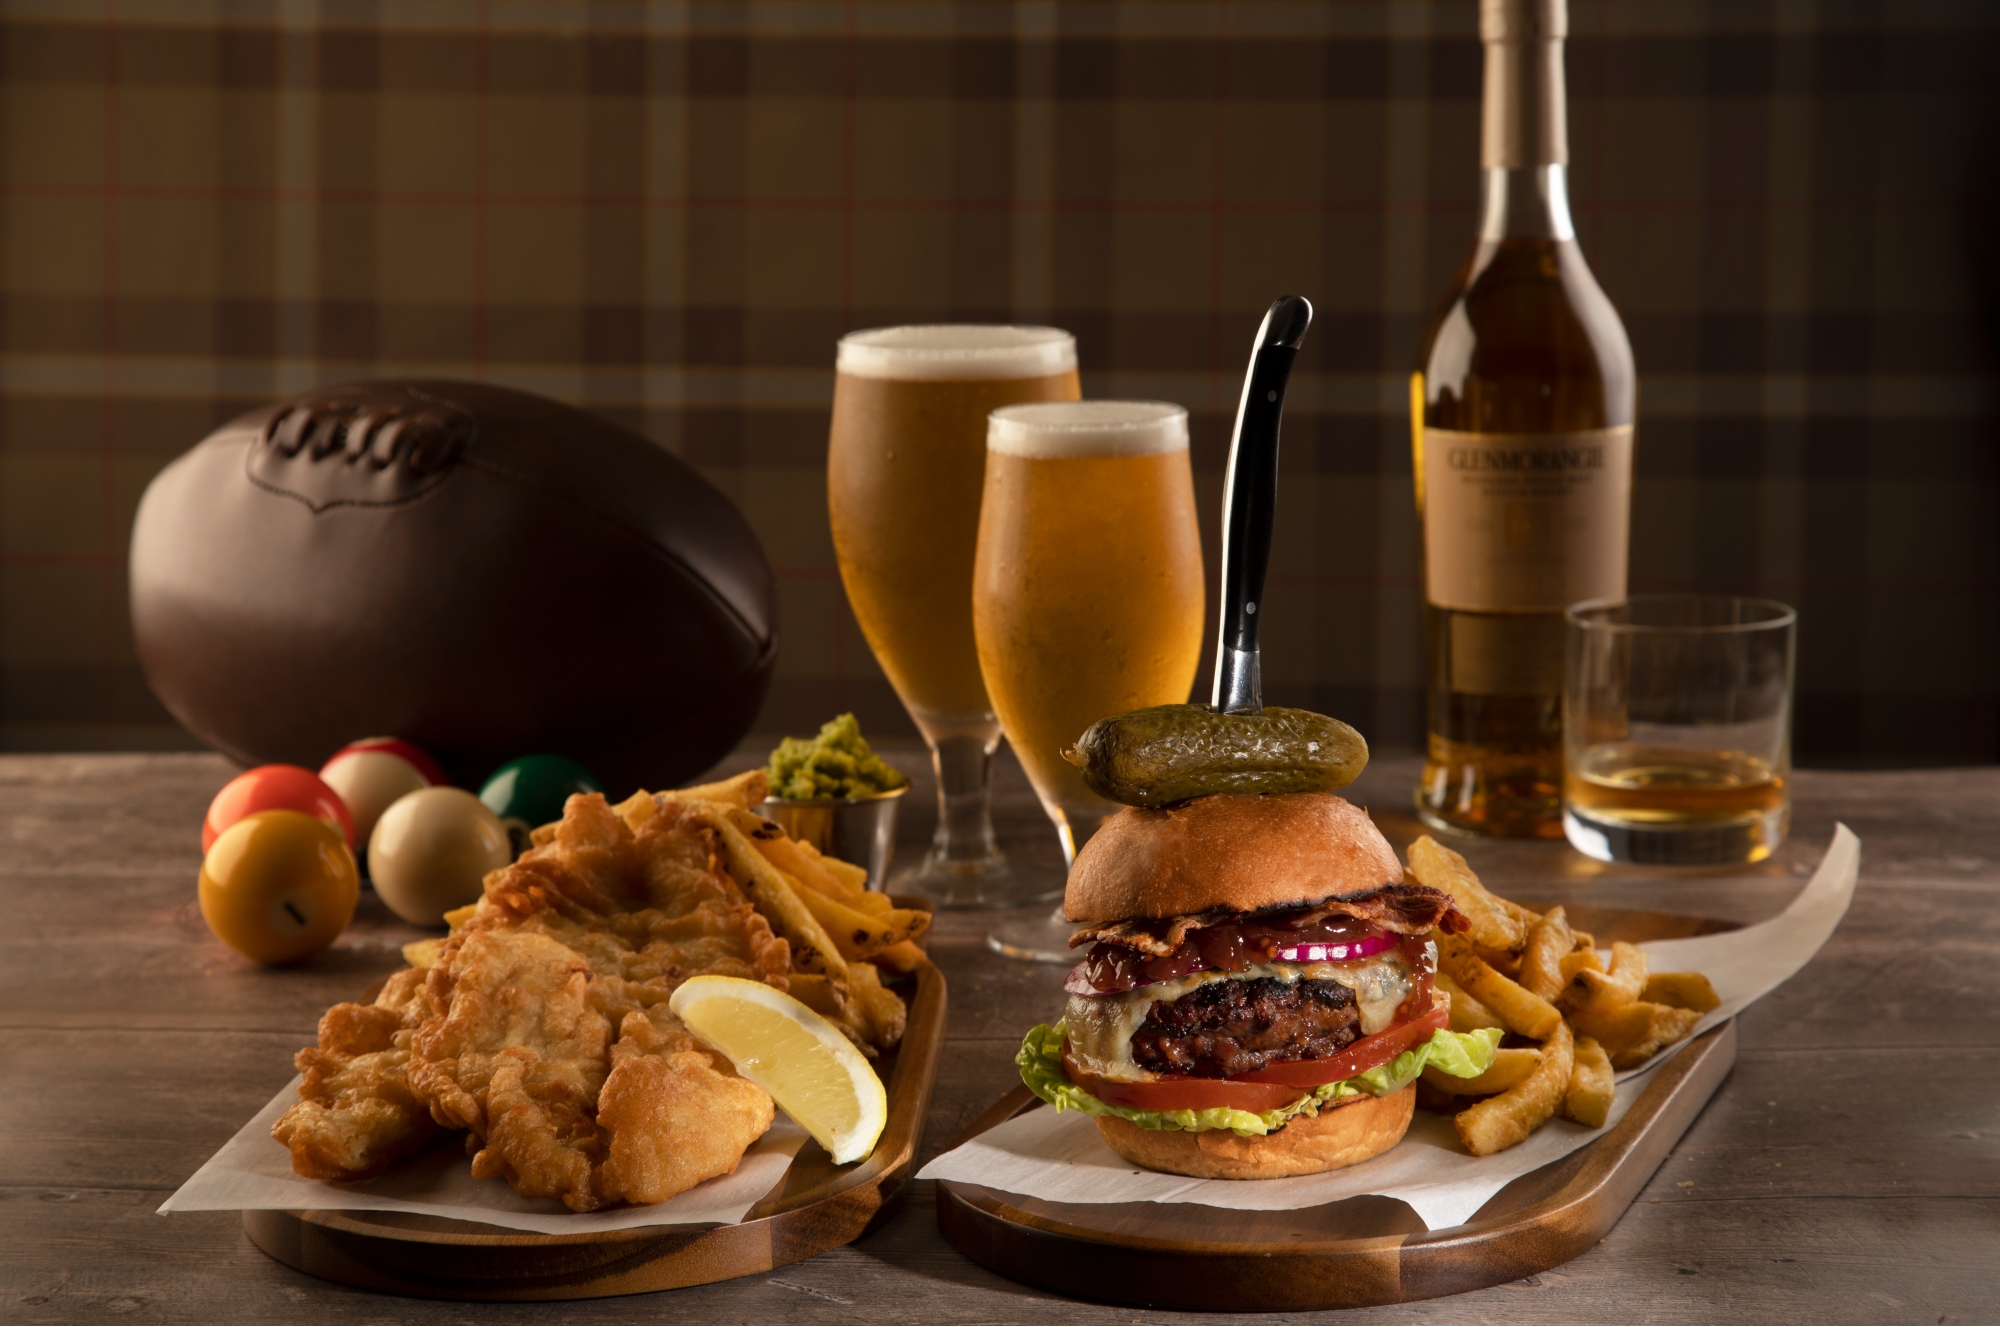 fish and chips paired with a burger and fries in front of some alcohol on a table